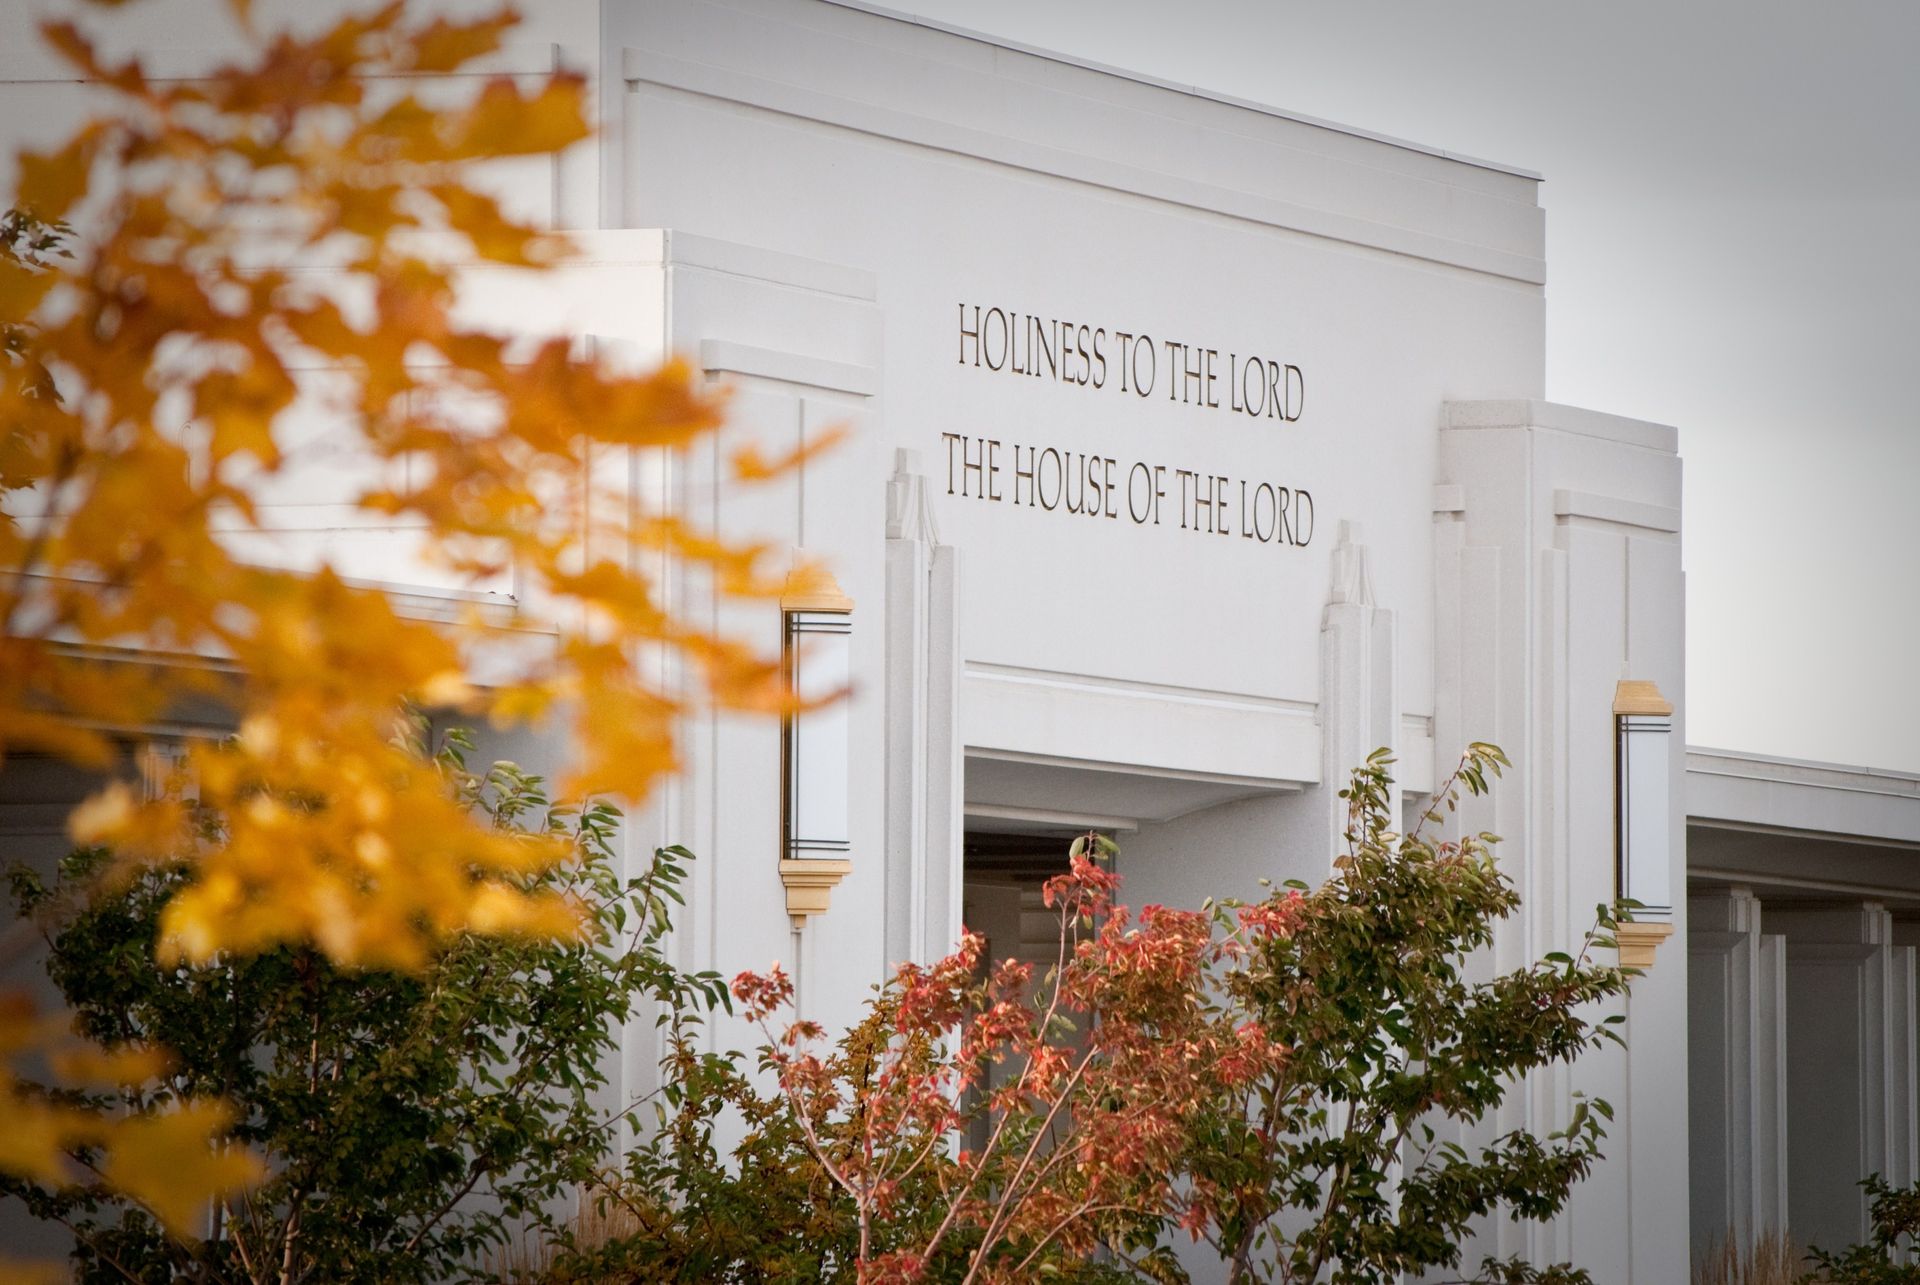 The Rexburg Idaho Temple inscription, “Holiness to the Lord: The House of the Lord,” including scenery.